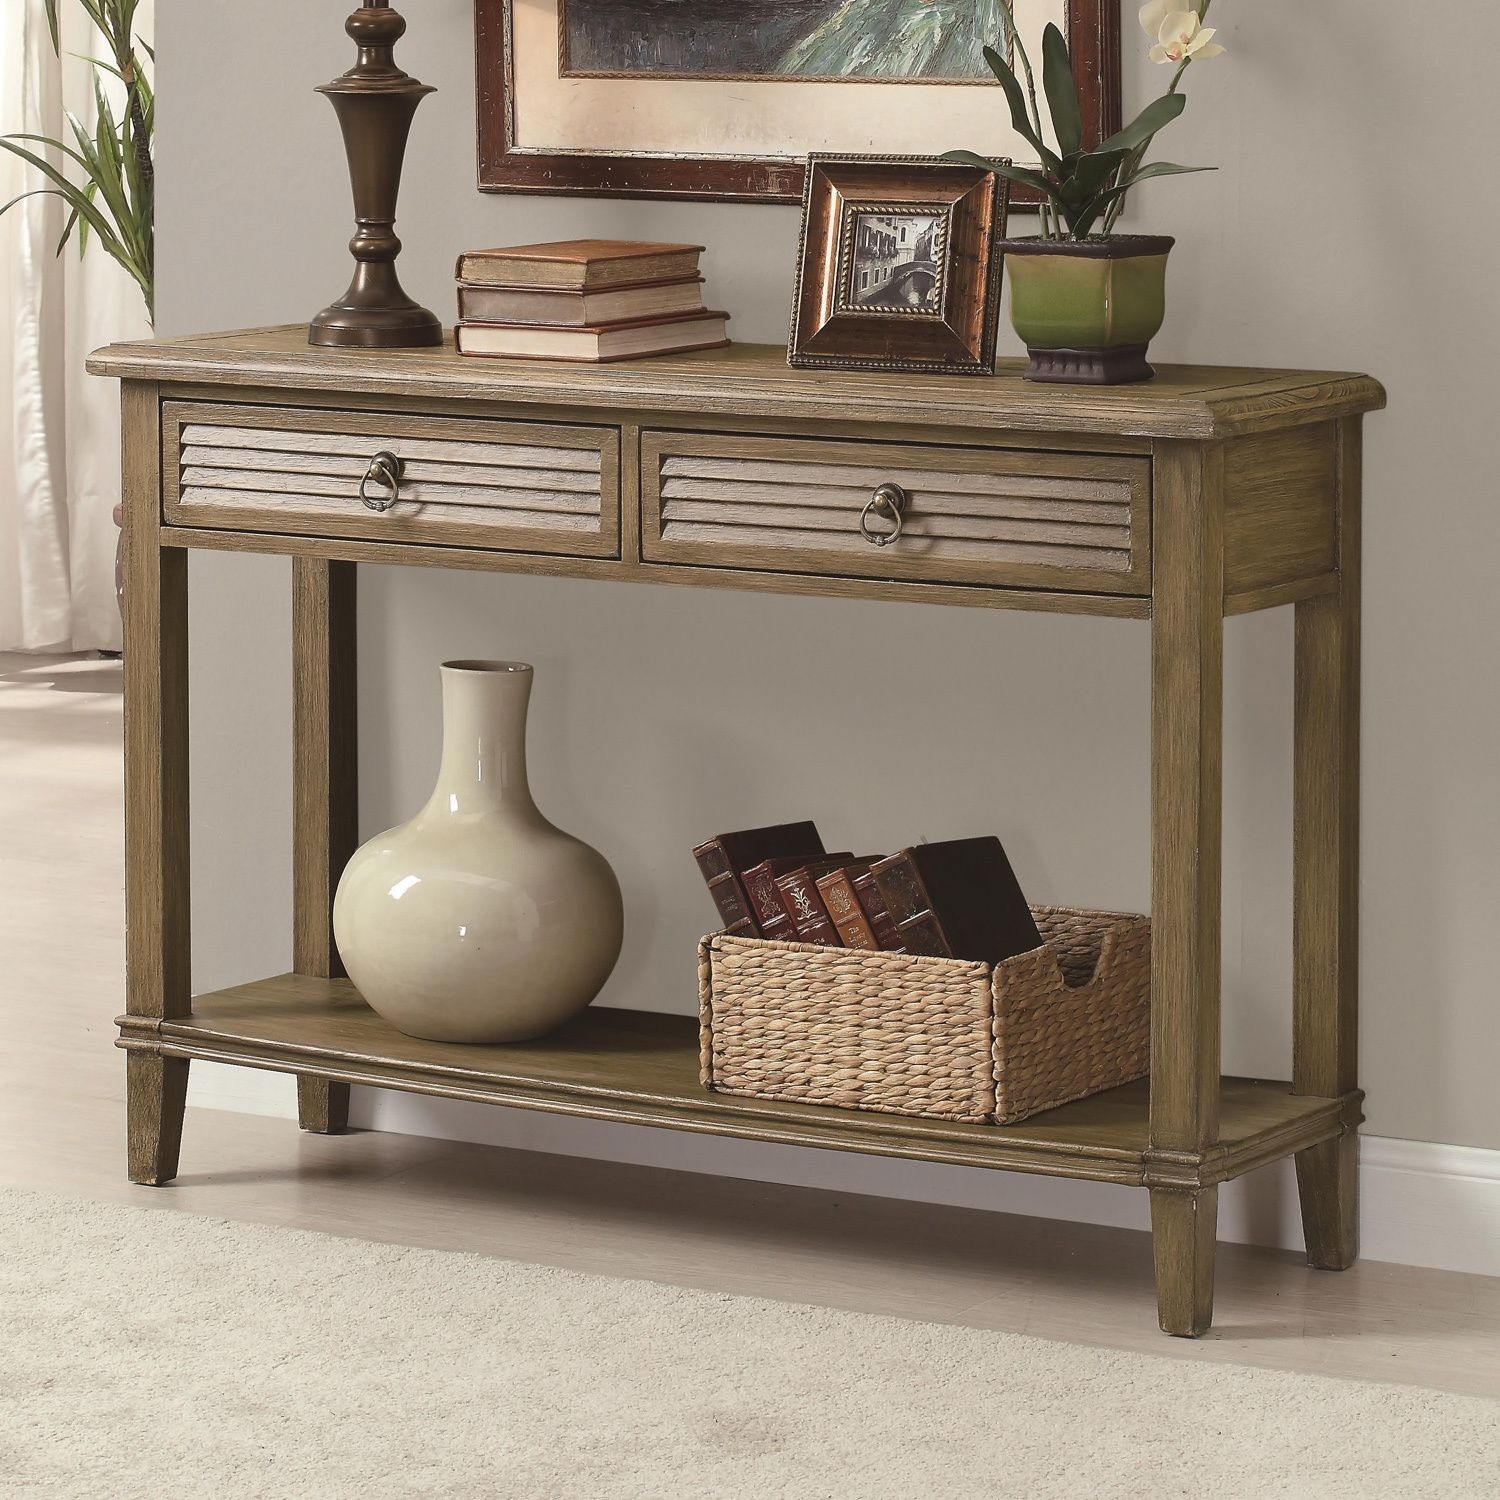 Entryway console table with shutter front drawers